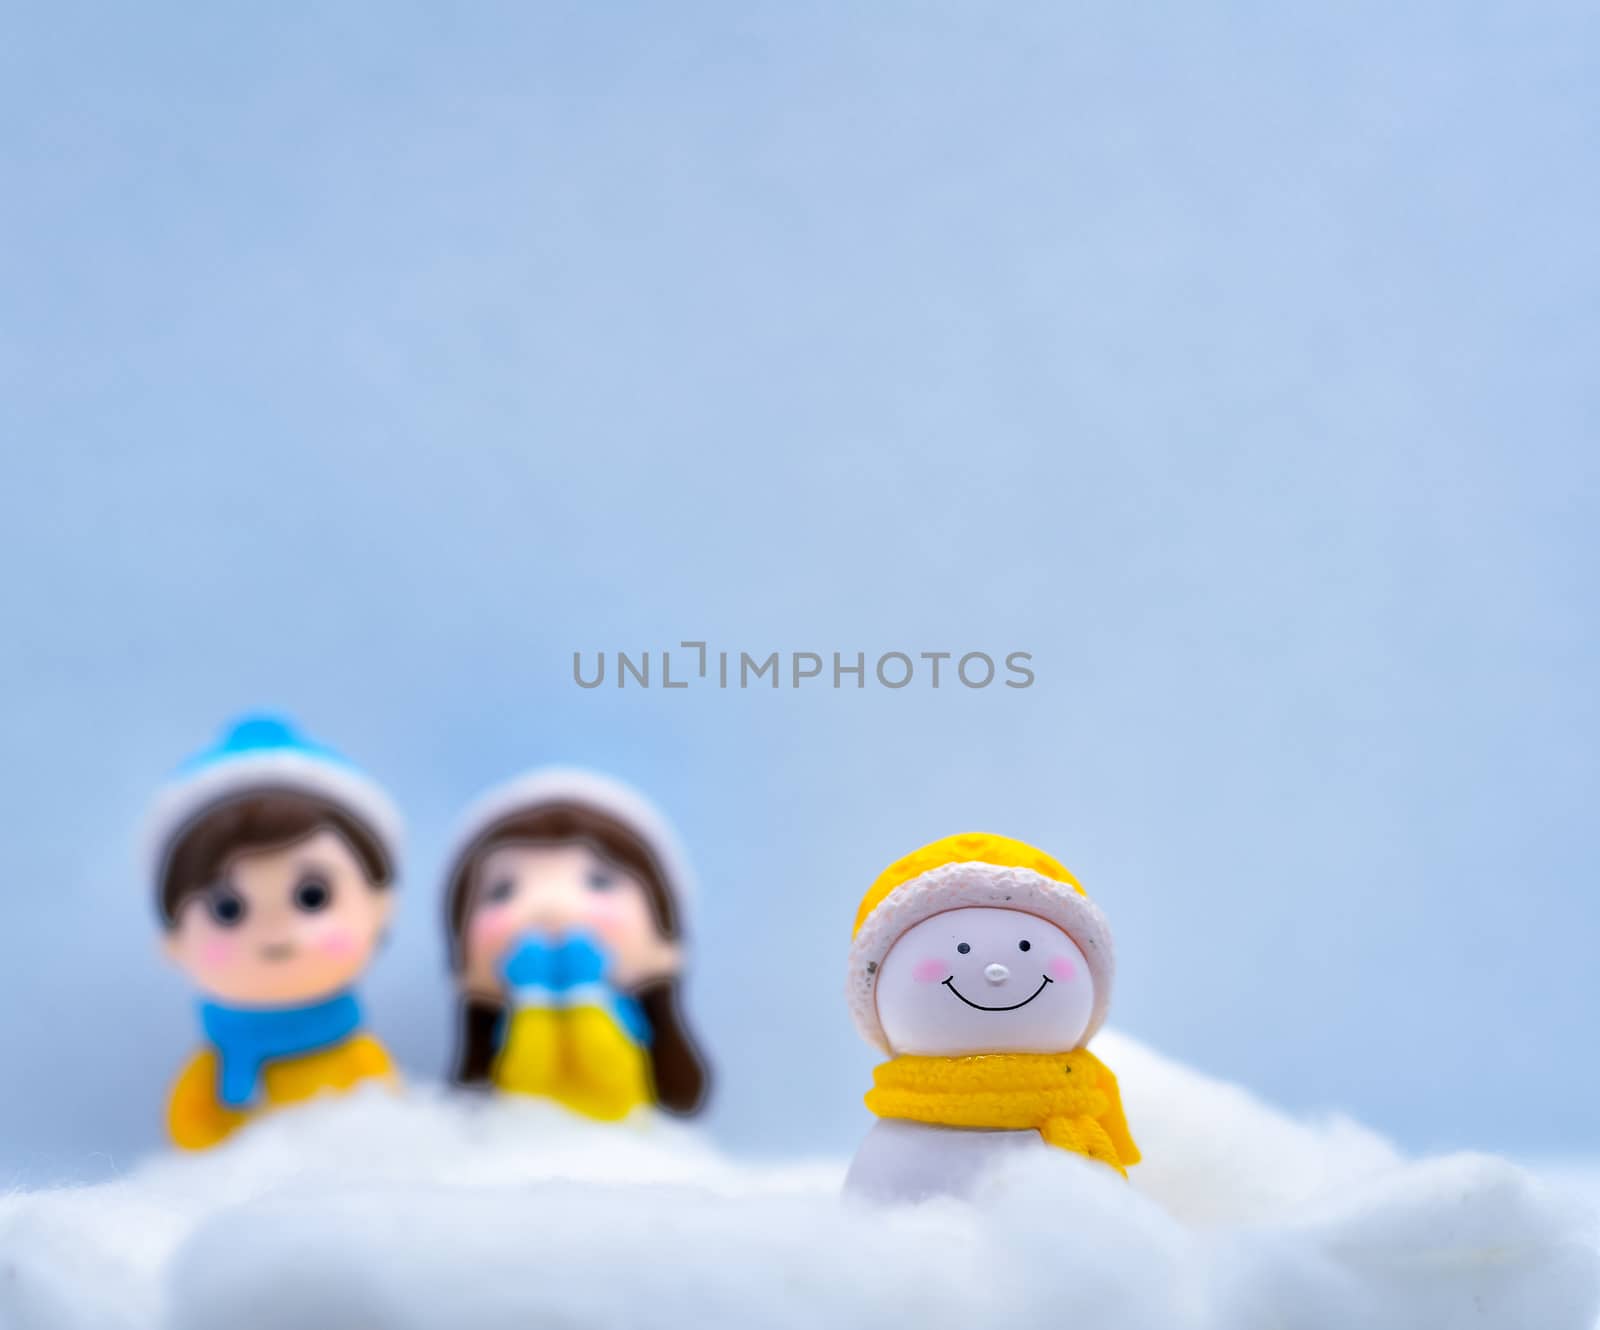 Tourism and travel concept: Miniature little snowman in winter snow with couple in the background by rkbalaji